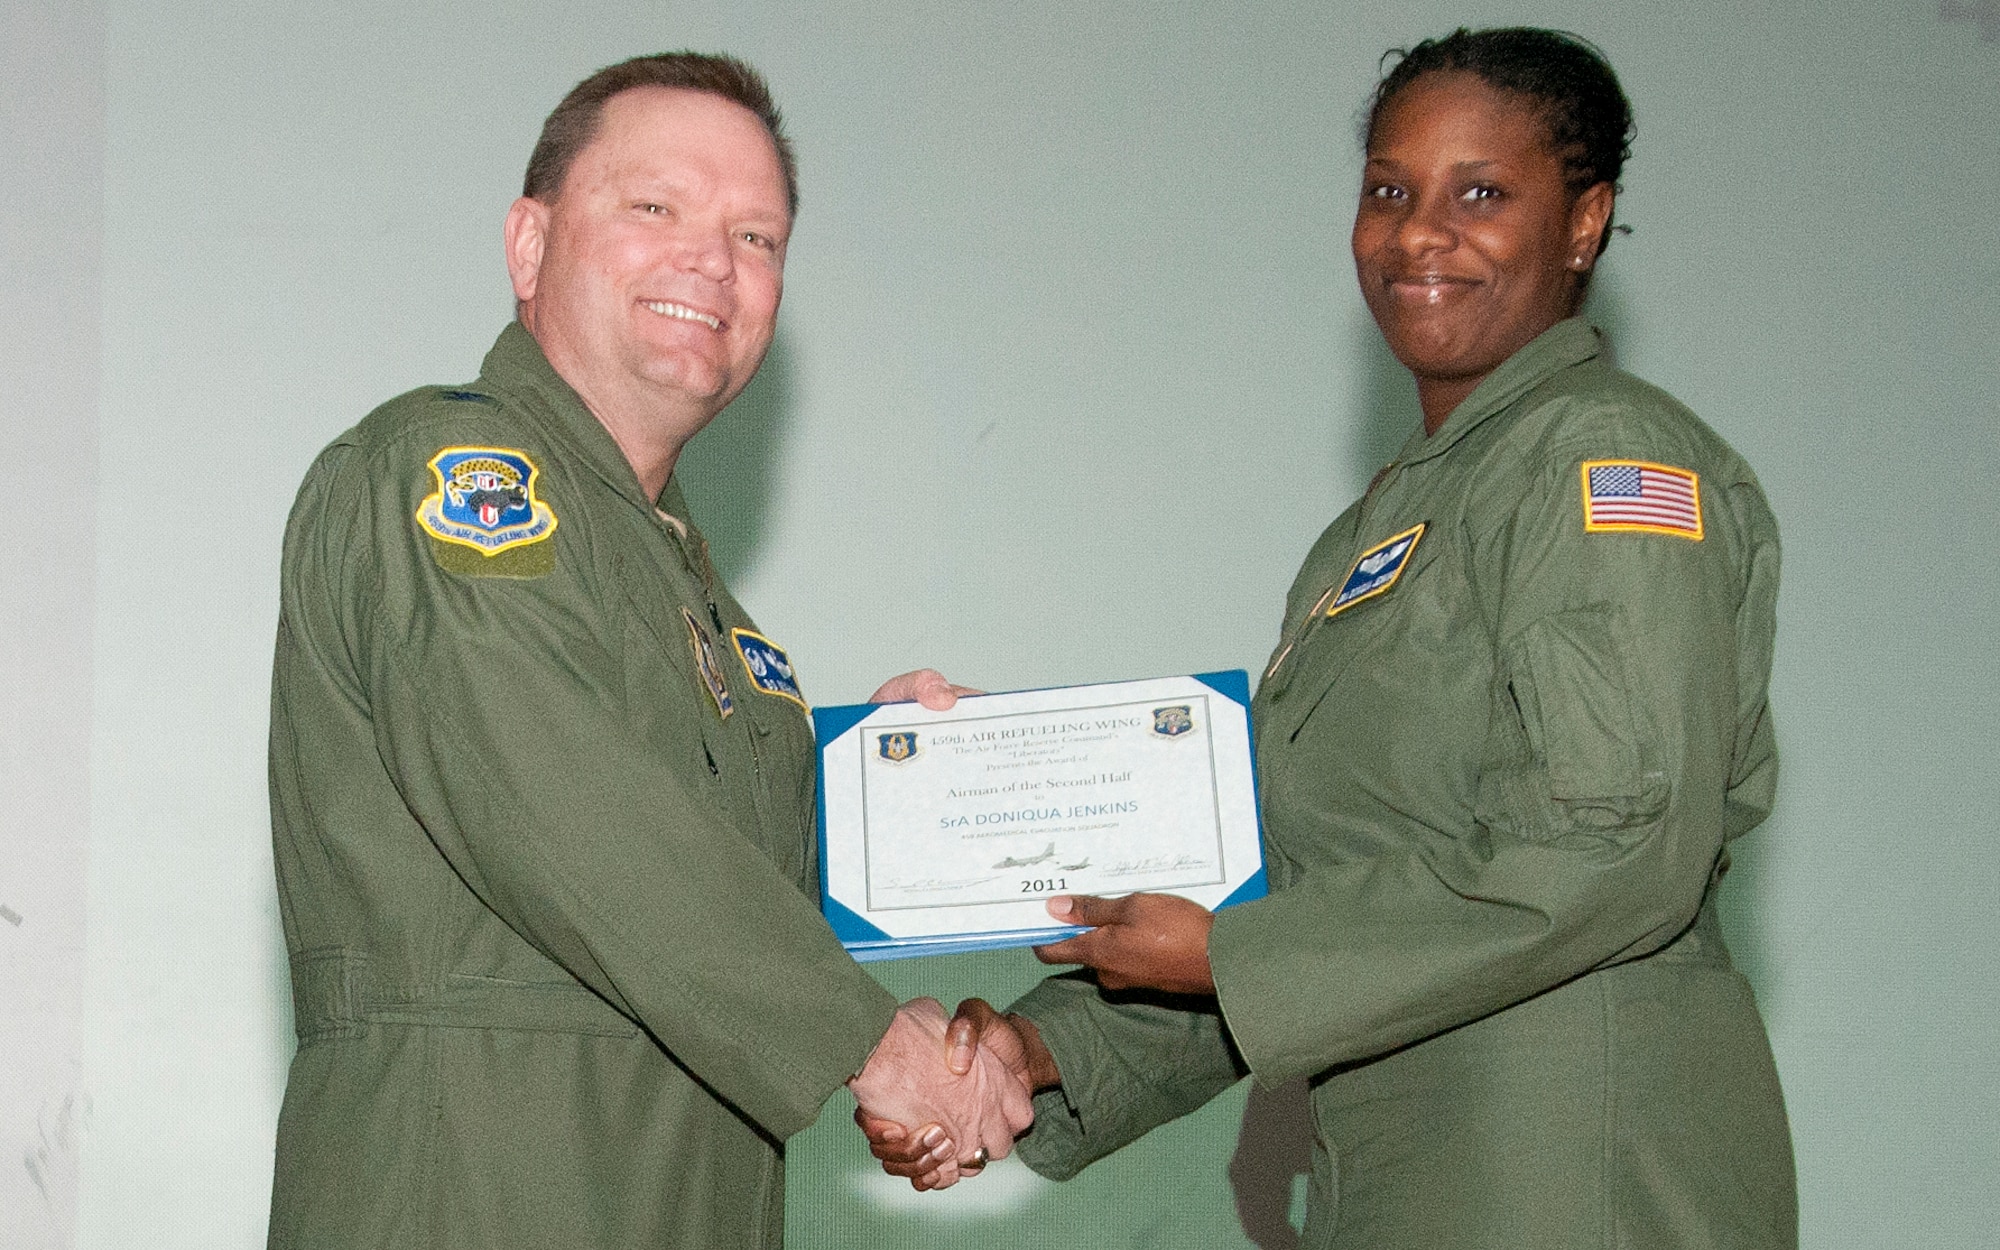 JOINT BASE ANDREWS, Md. -- Col. Samuel Mahaney, 459th Air Refueling Wing commander, congratulates Senior Airman Doniqua Jenkins, 459th Aeromedical Evacuation Squadron, for being awarded 459th ARW Airman of the Second Half 2011 during a commander's call here Feb. 12, 2012. (U.S. Air Force photo/Staff Sgt. Brent Skeen)